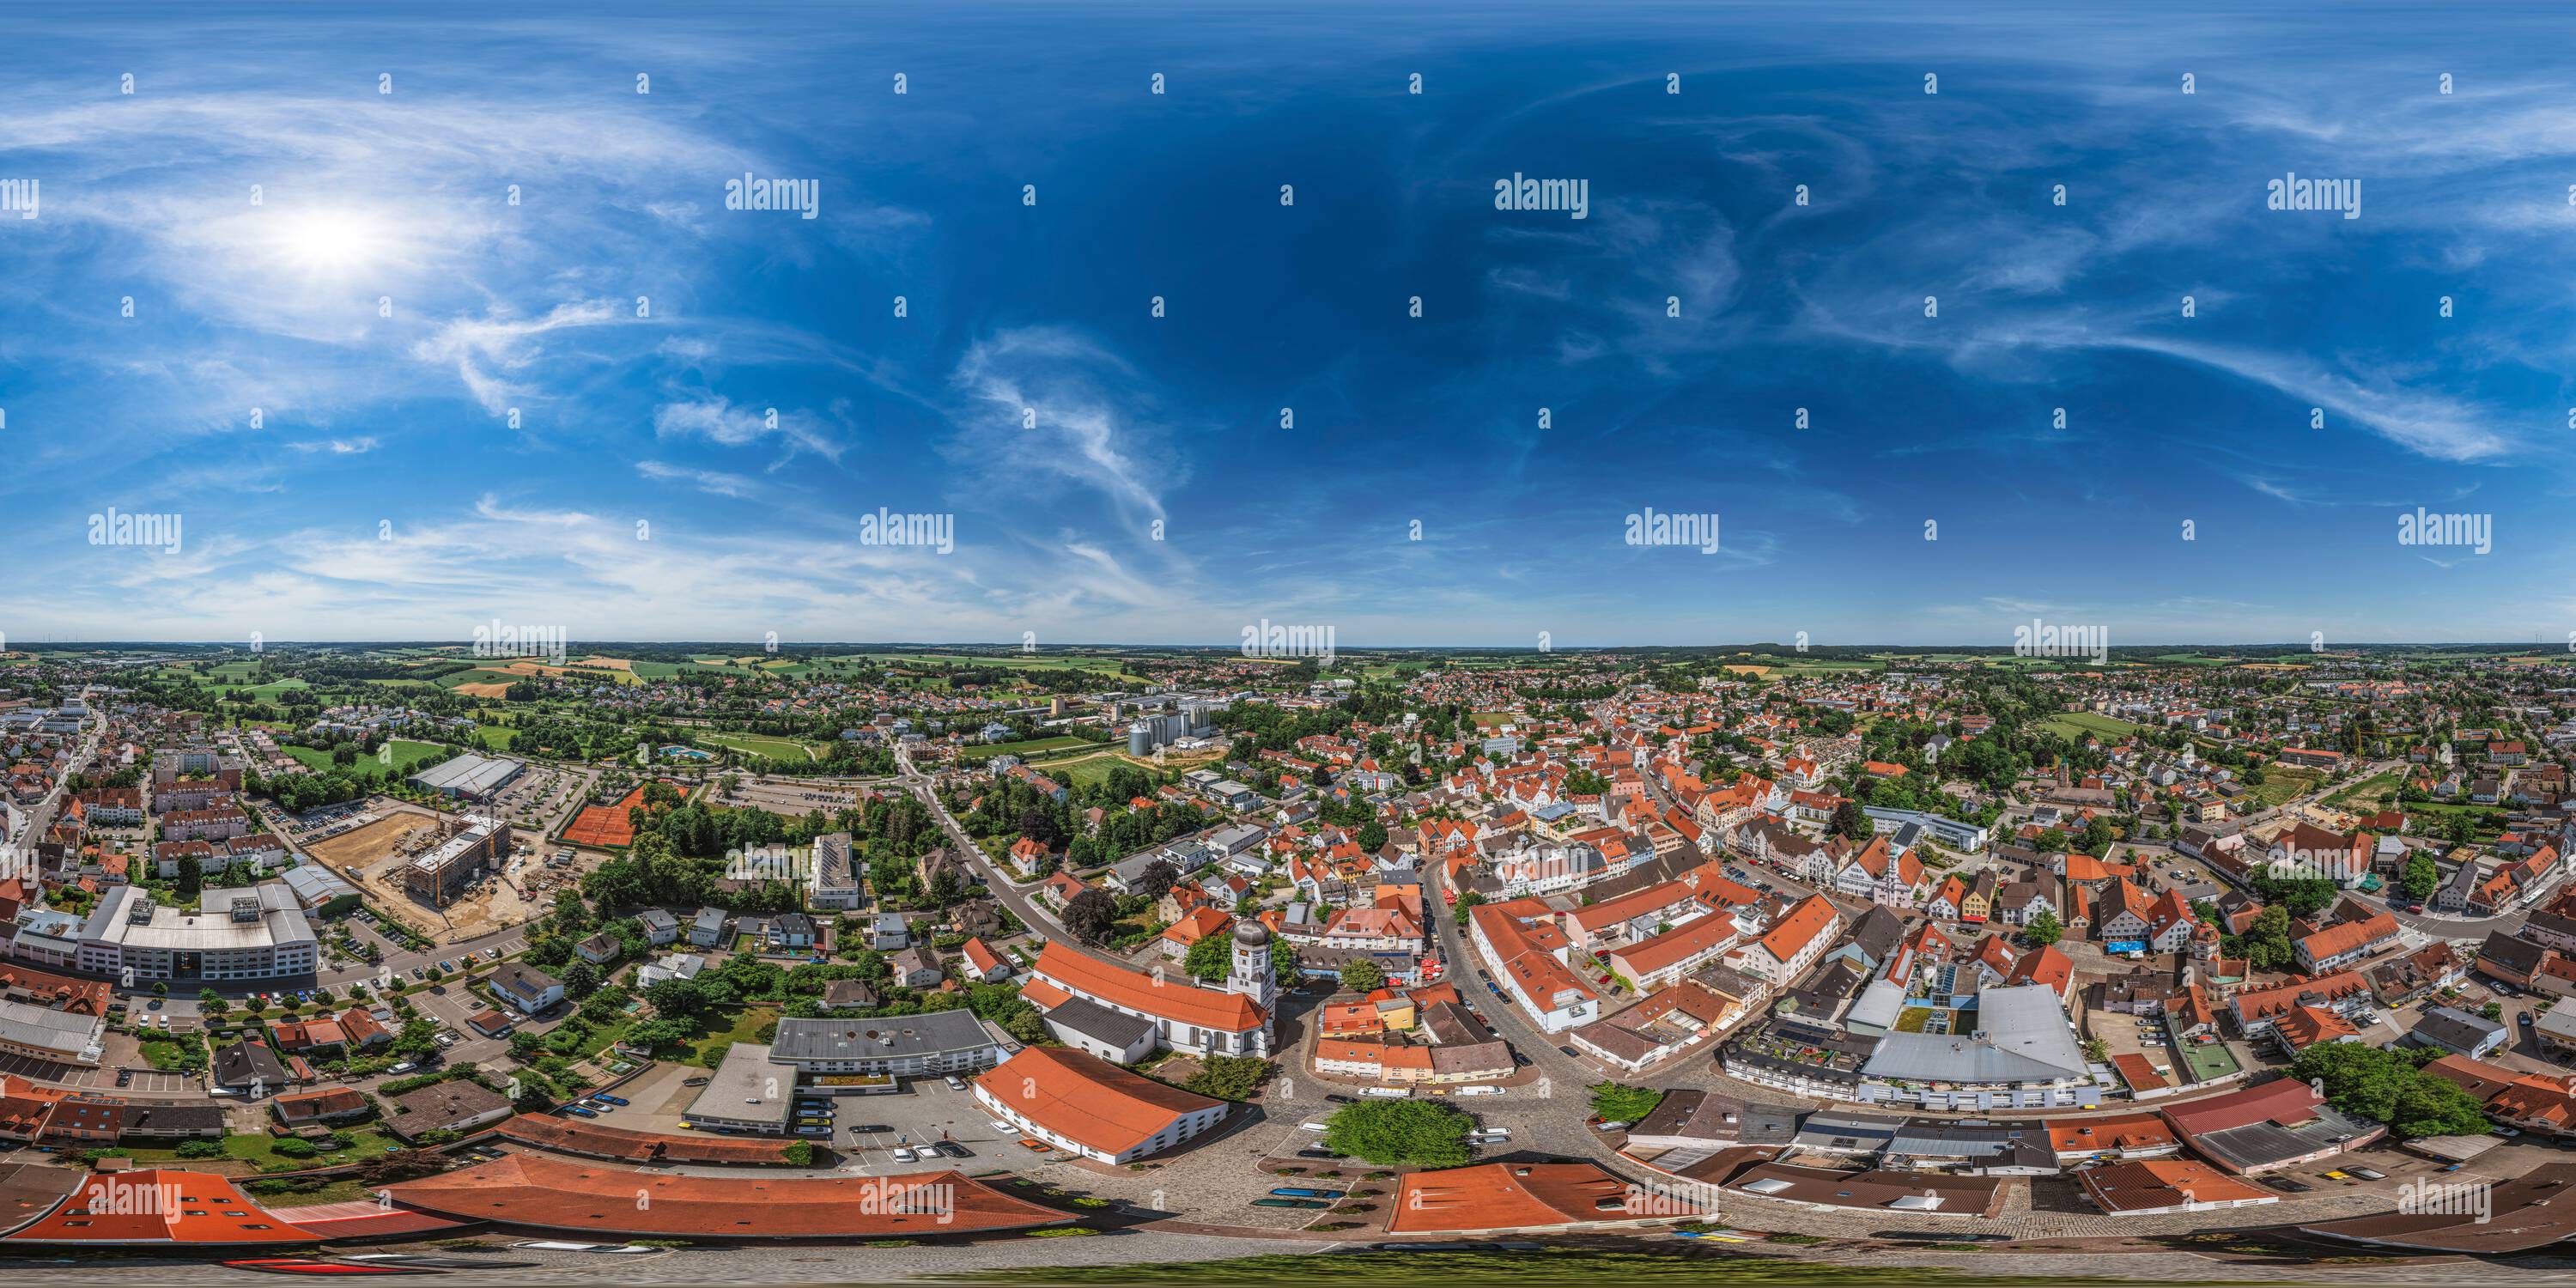 360 degree panoramic view of 360° - Region and City of Aichach from above